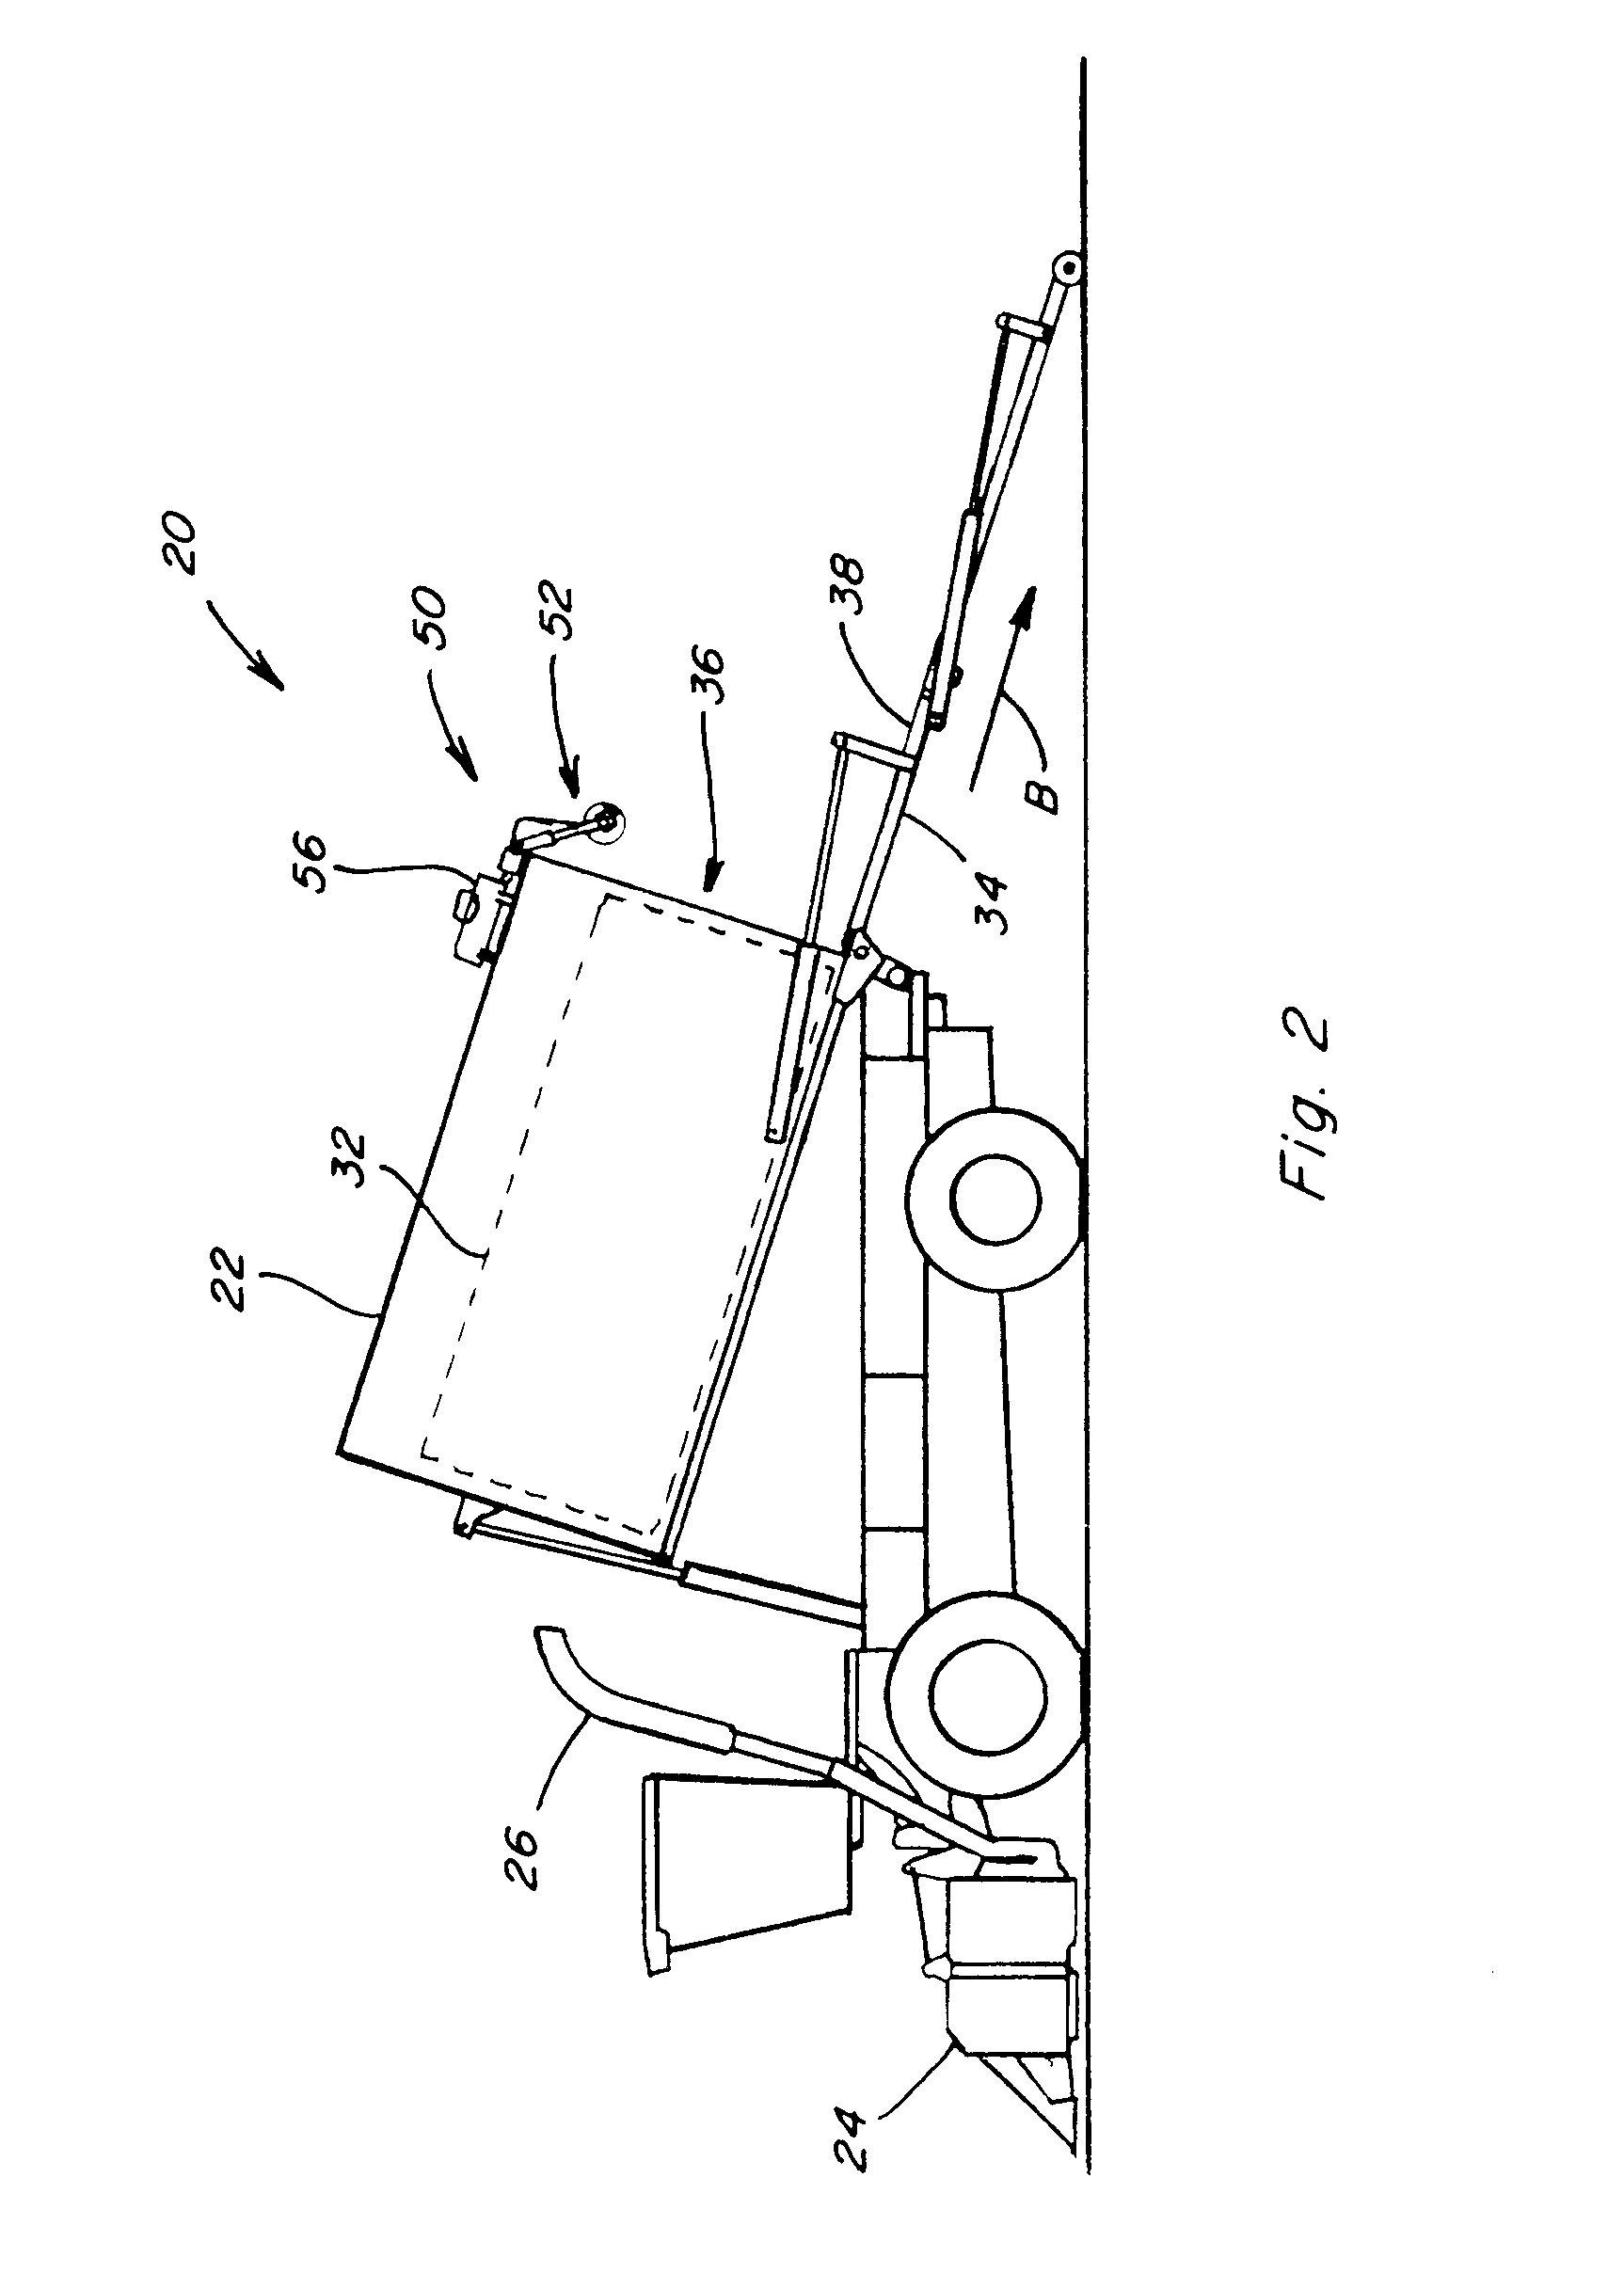 System and method for protecting a cotton module during the unloading process